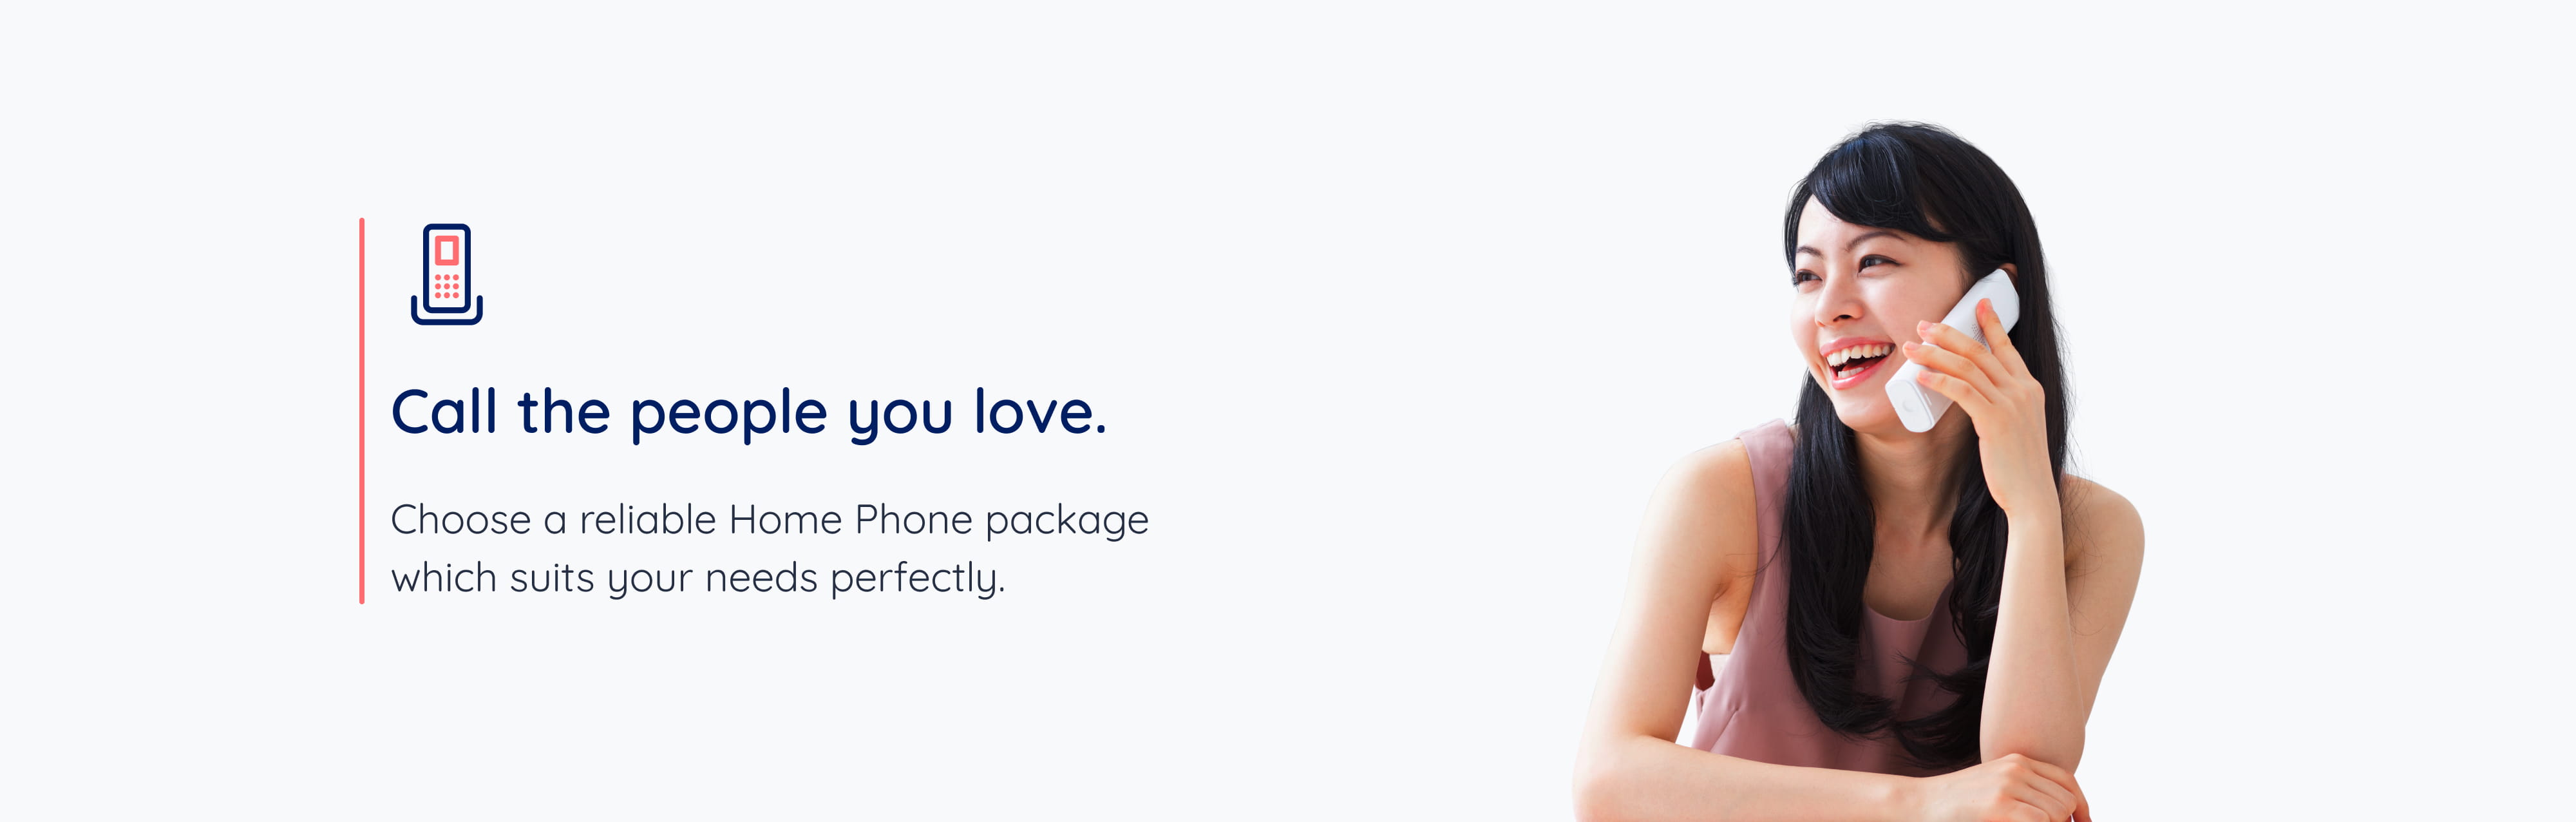 Call the people you love. Choose a reliable Home Phone package which suits your needs perfectly.